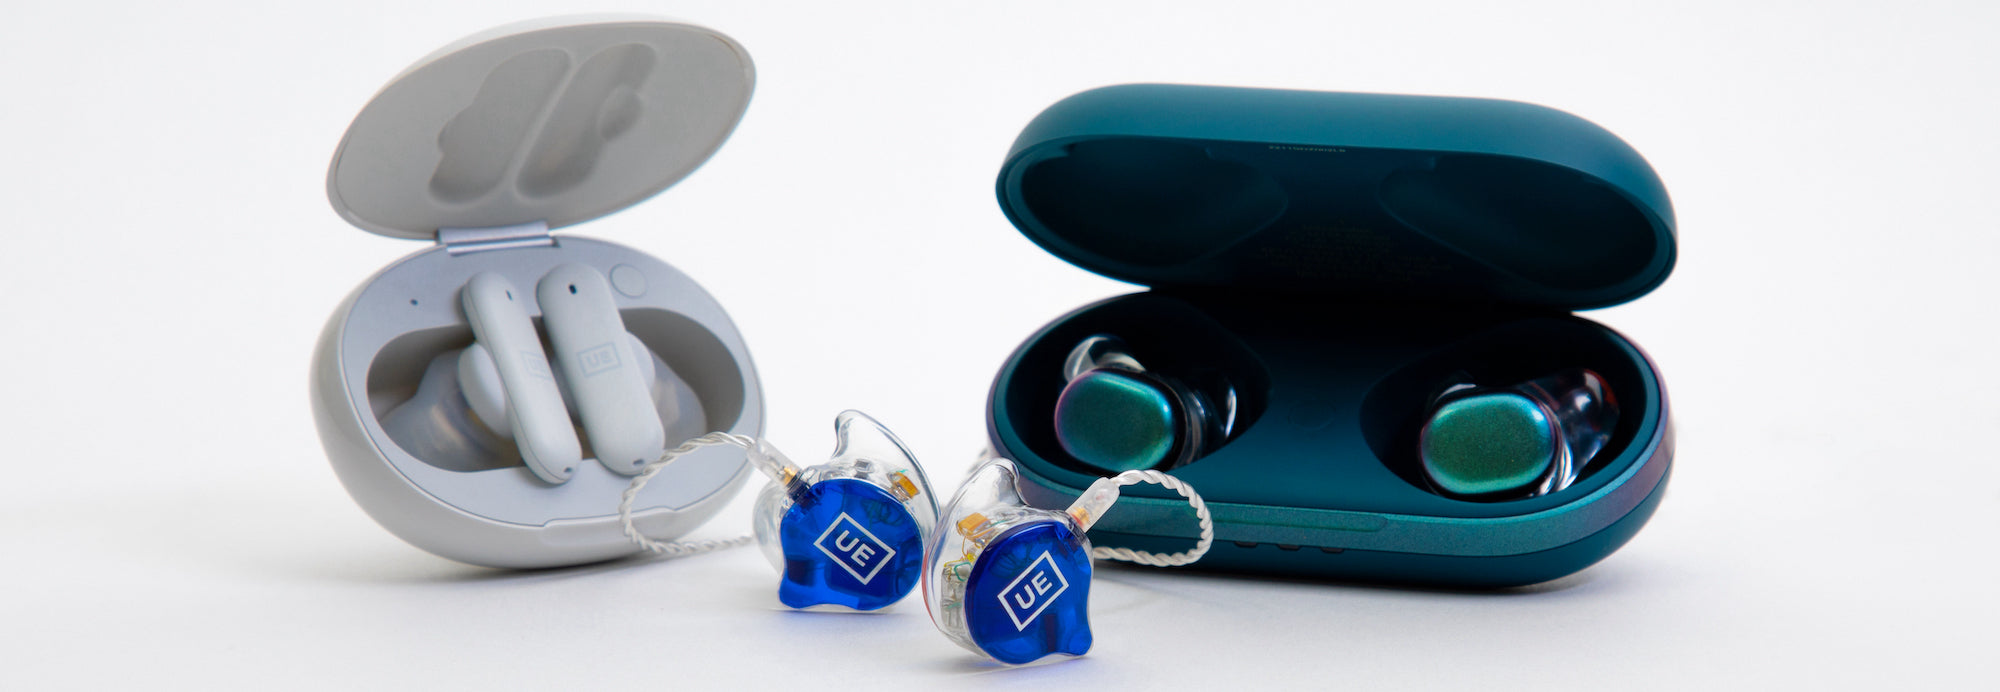 UE DROPS vs UE FITS vs UE Custom | Which Earbuds Are Right for You?